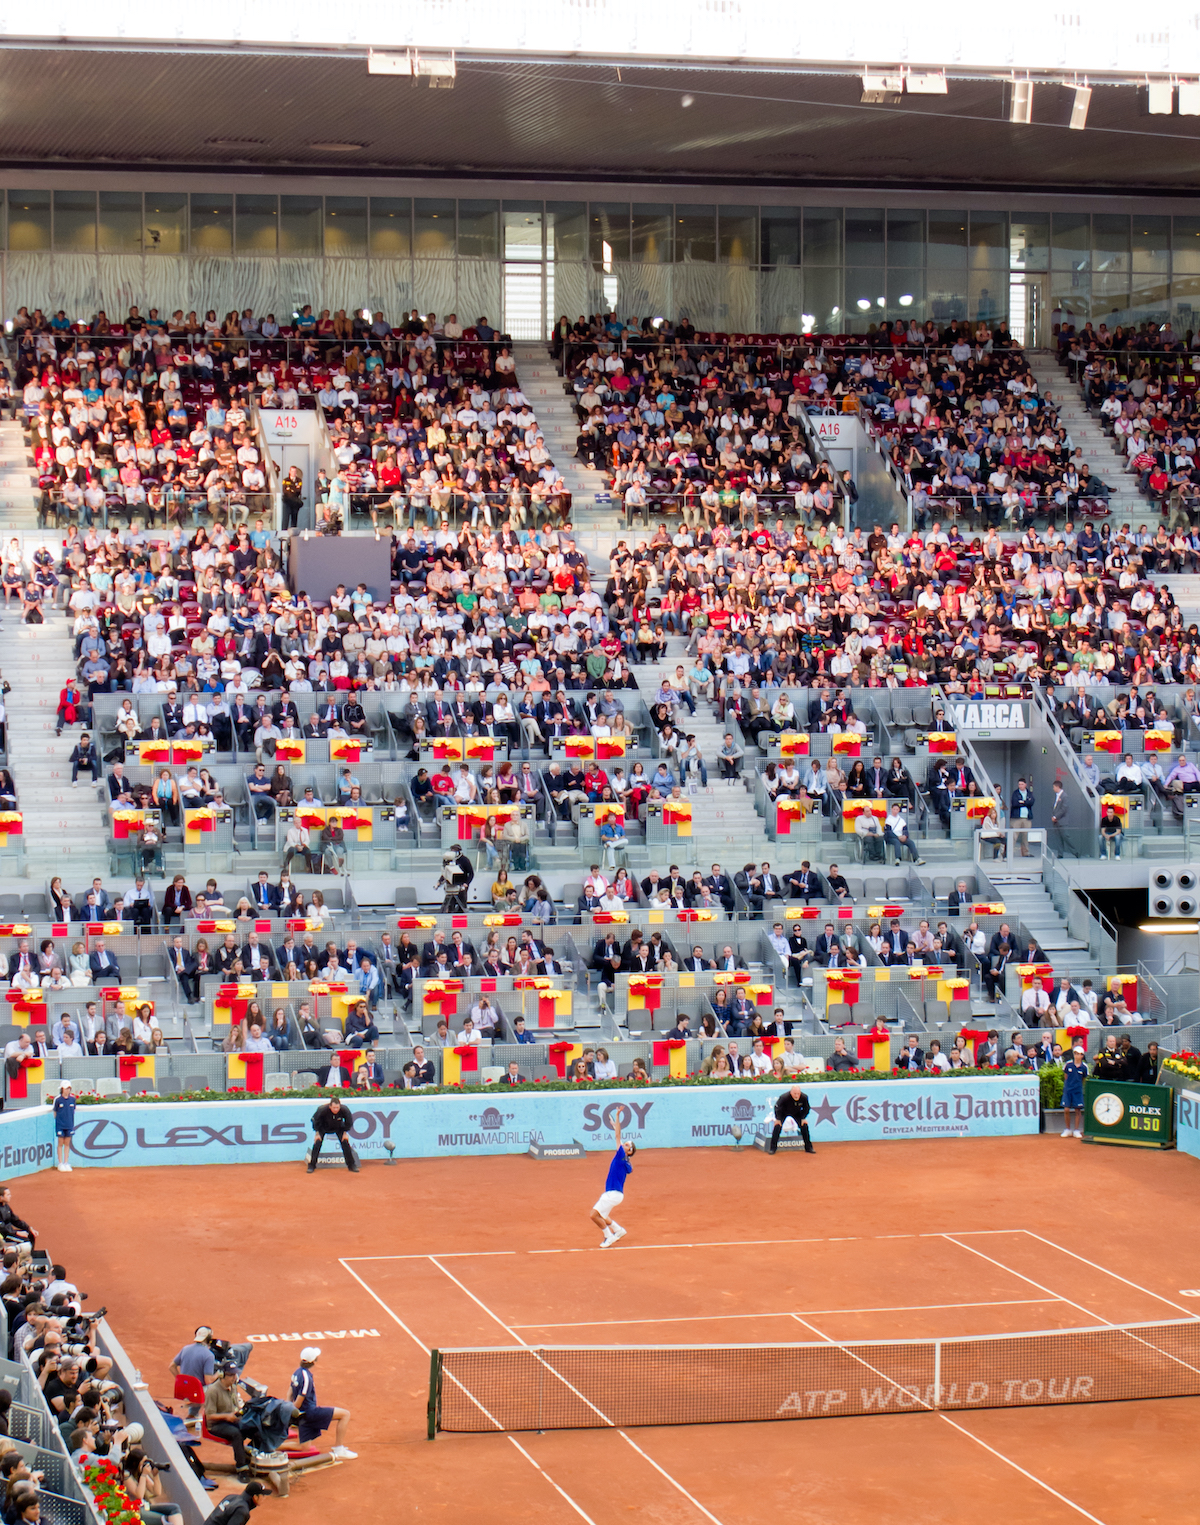 Tennis match being played on a clay court in front of a crowd.